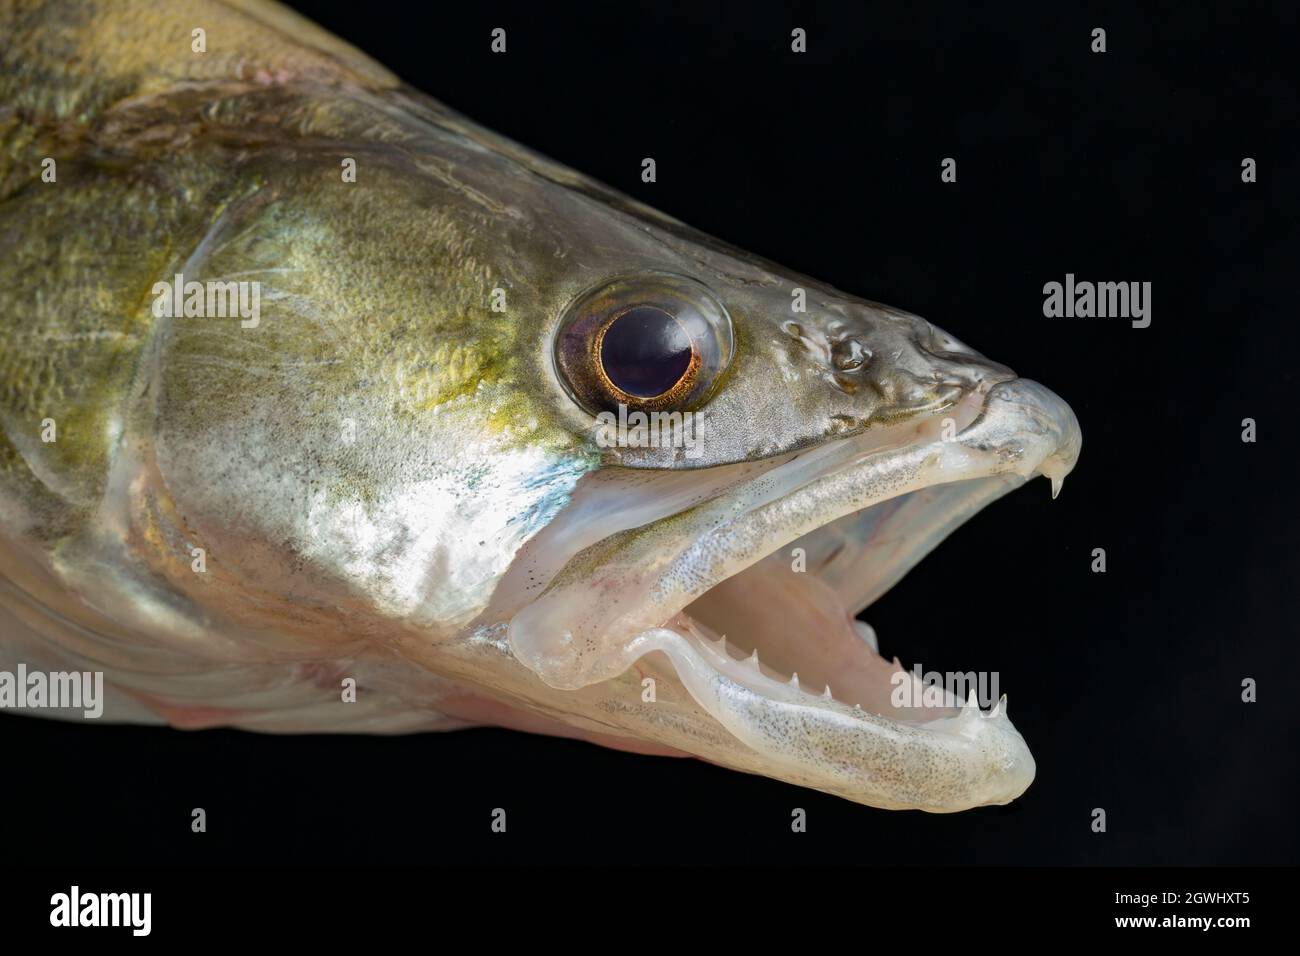 The head and jaws of a Zander, Sander lucioperca. Zander are a predatory species that preys on other fish. They are a non native invasive species in t Stock Photo